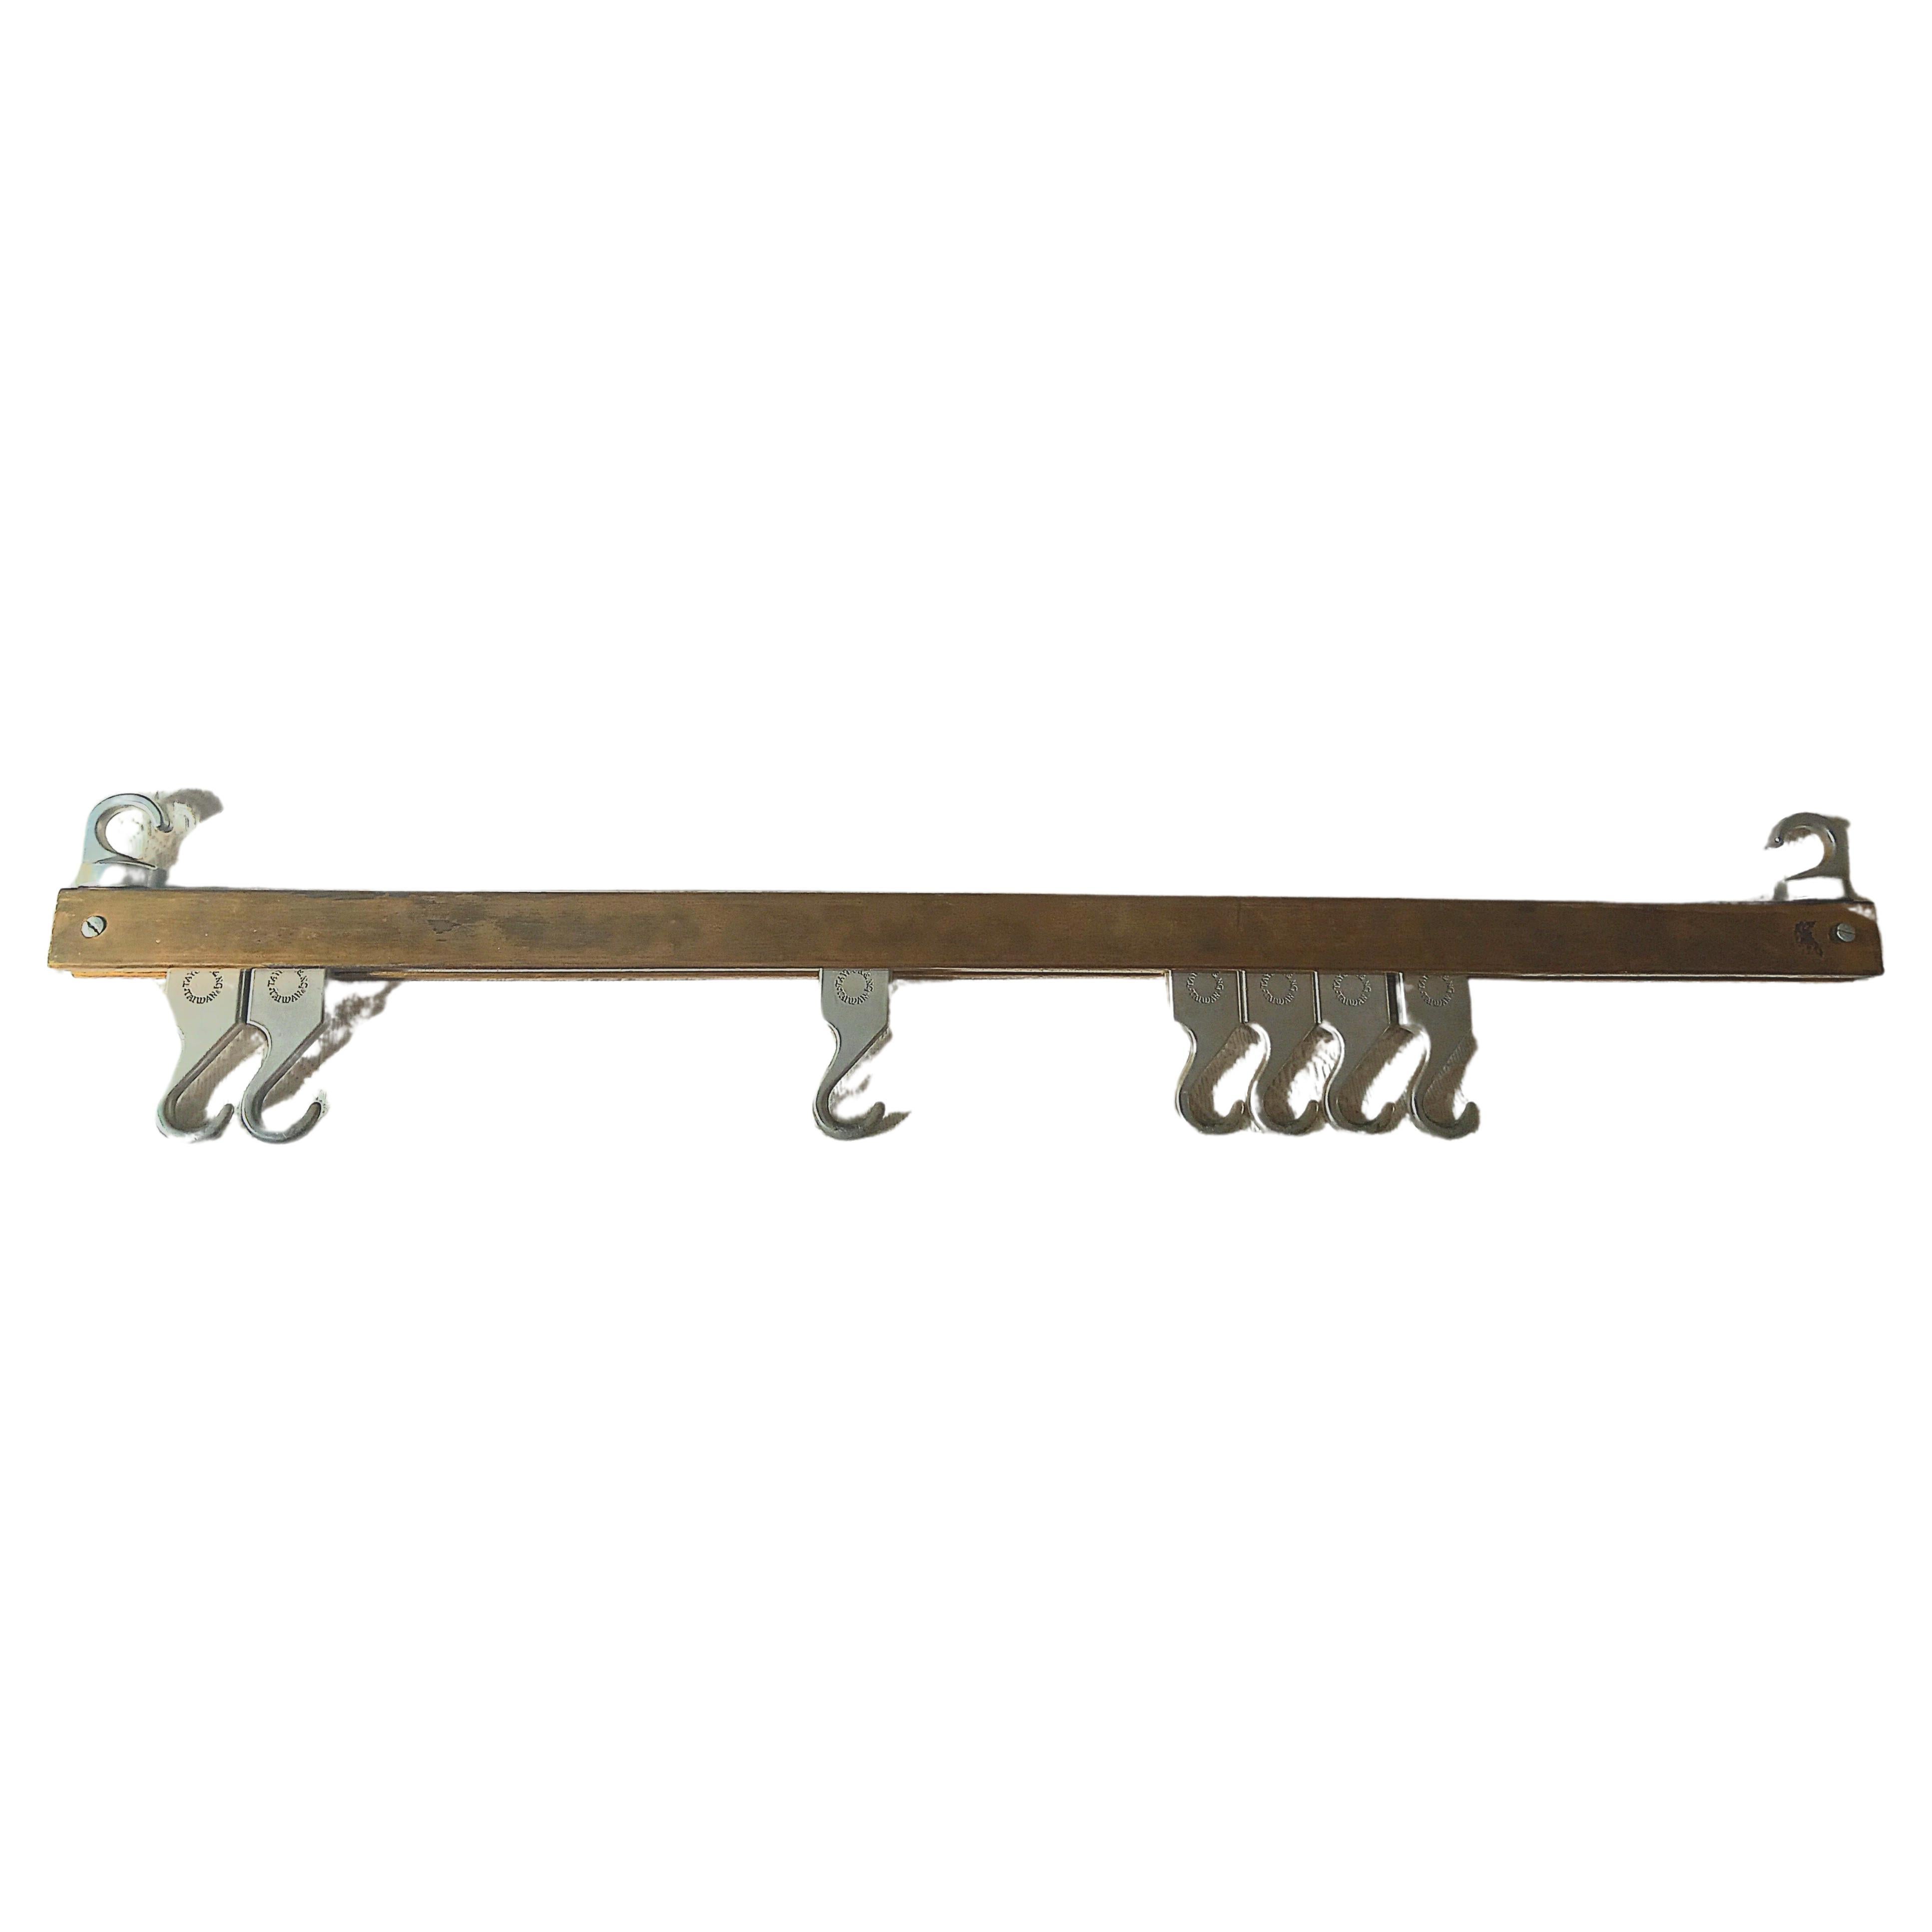 Unusual item-Uncommon
 Vey Industrial  butcher hook or hanger.
It is made of brass and steel and has several hooks.
It is a very decorative piece for the kitchen. It can be hung on the wall or from the ceiling.
Ideal for hanging pots or kitchen